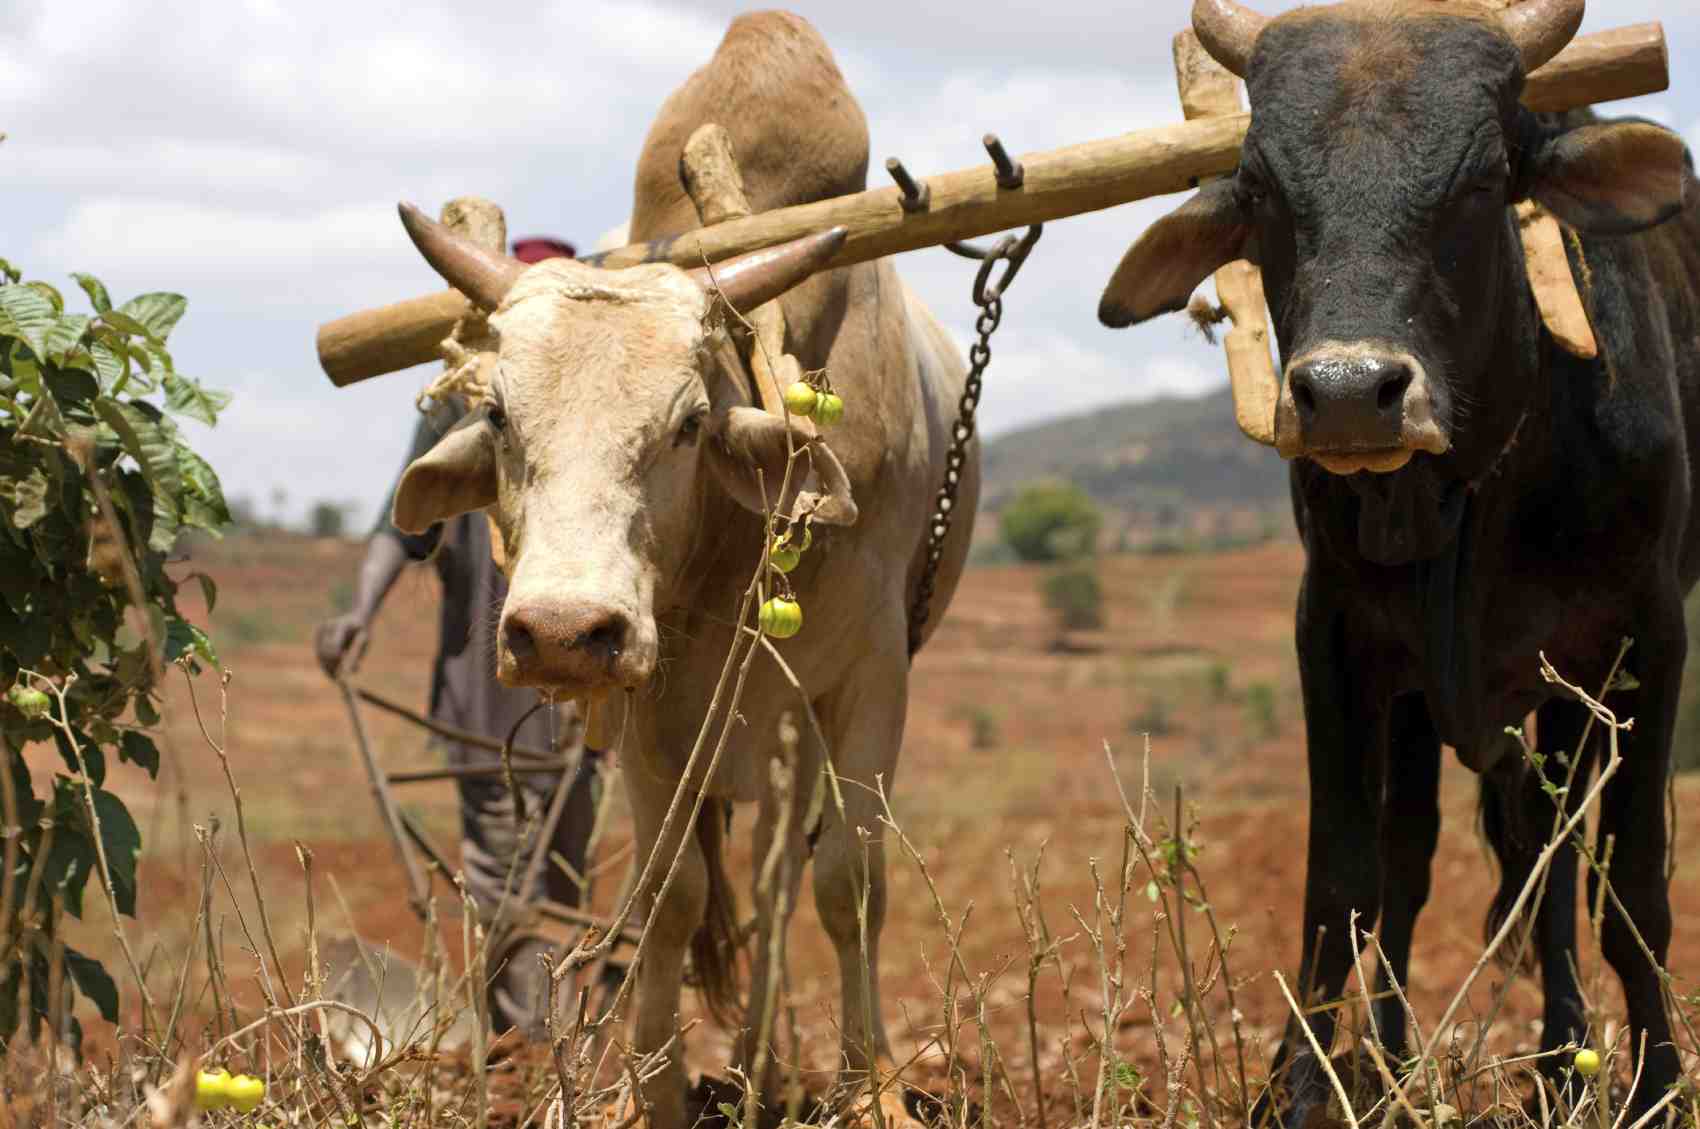 Kenyan farmer plowing his field with oxen